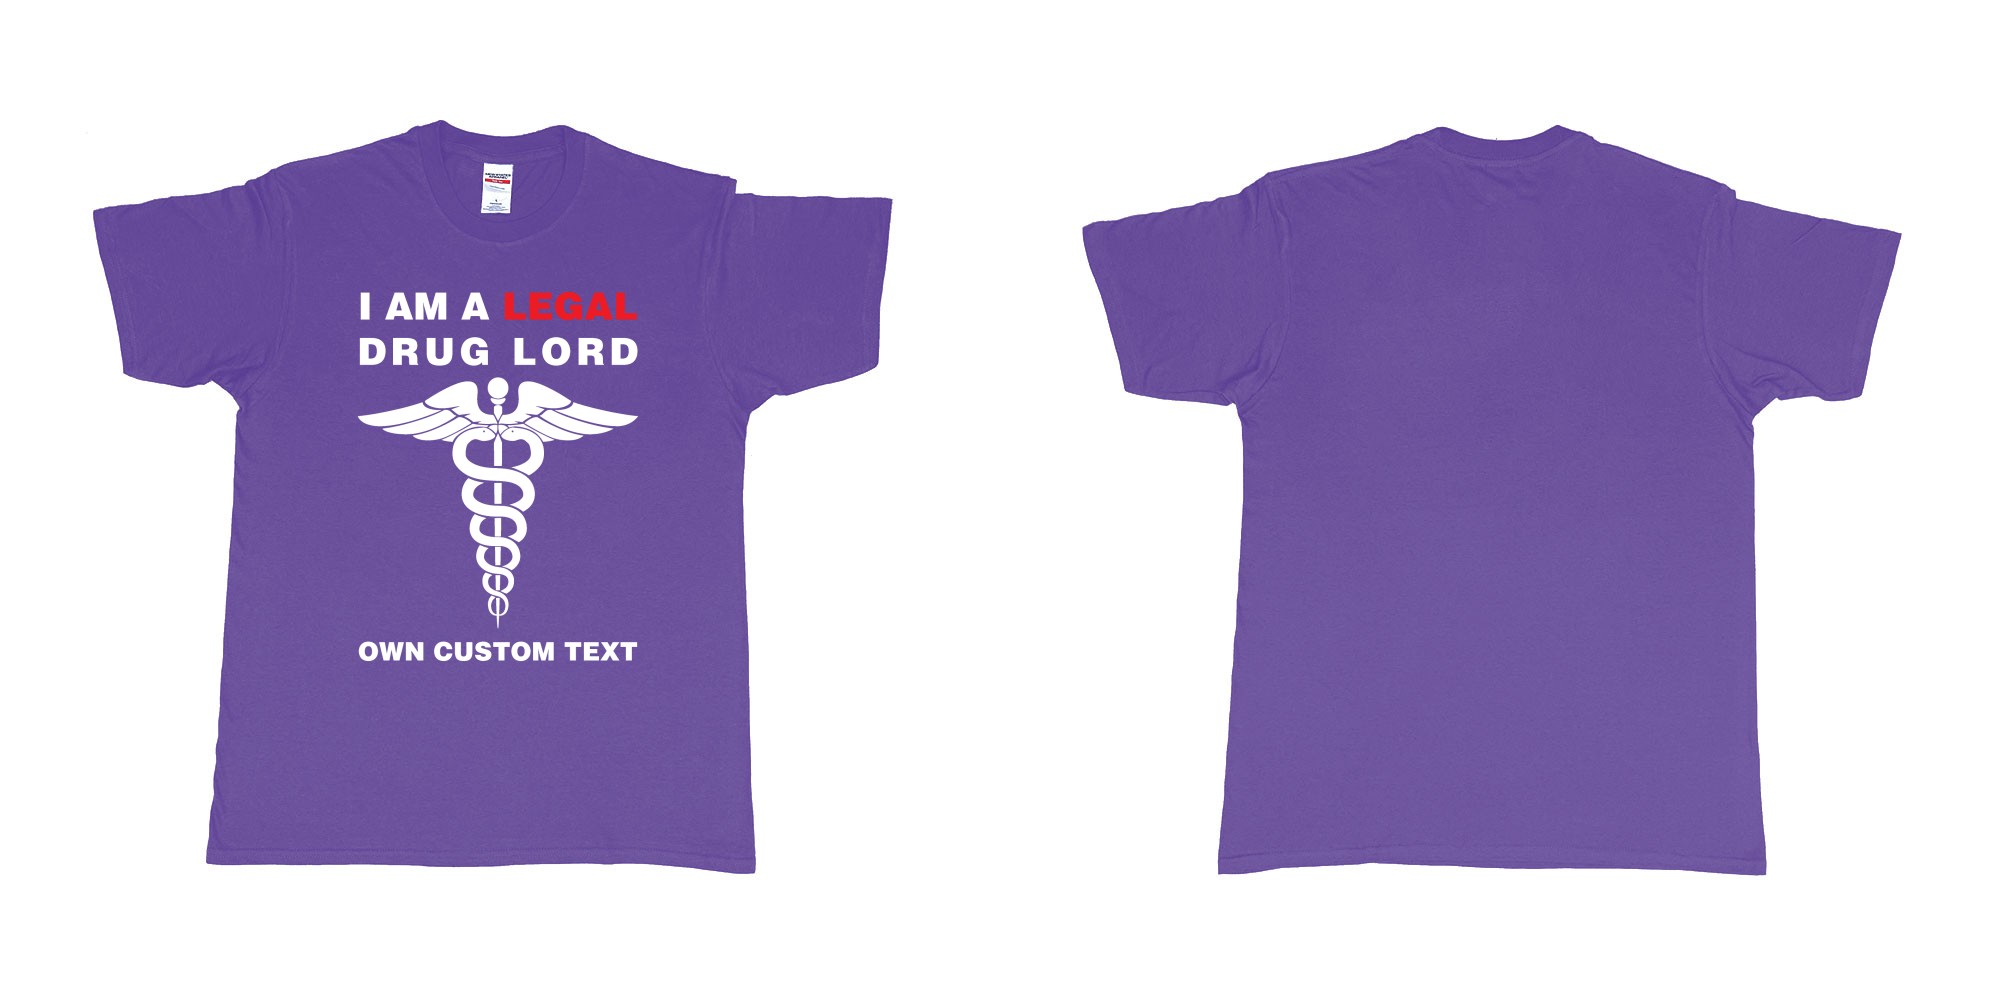 Custom tshirt design legal drug lord in fabric color purple choice your own text made in Bali by The Pirate Way